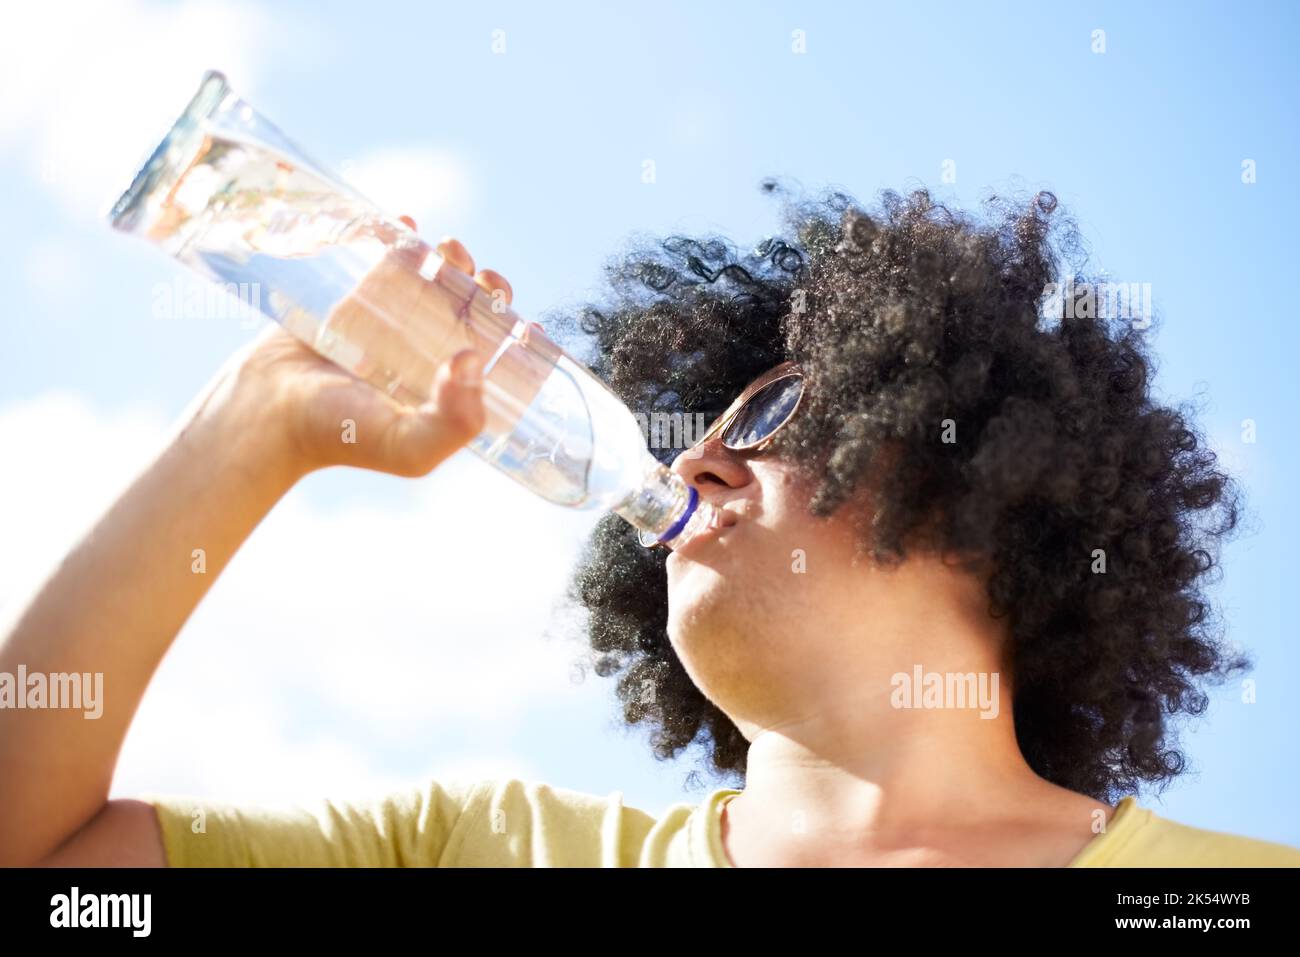 Sipping in the sun. a young man with a black afro wig drinking out of a bottle. Stock Photo